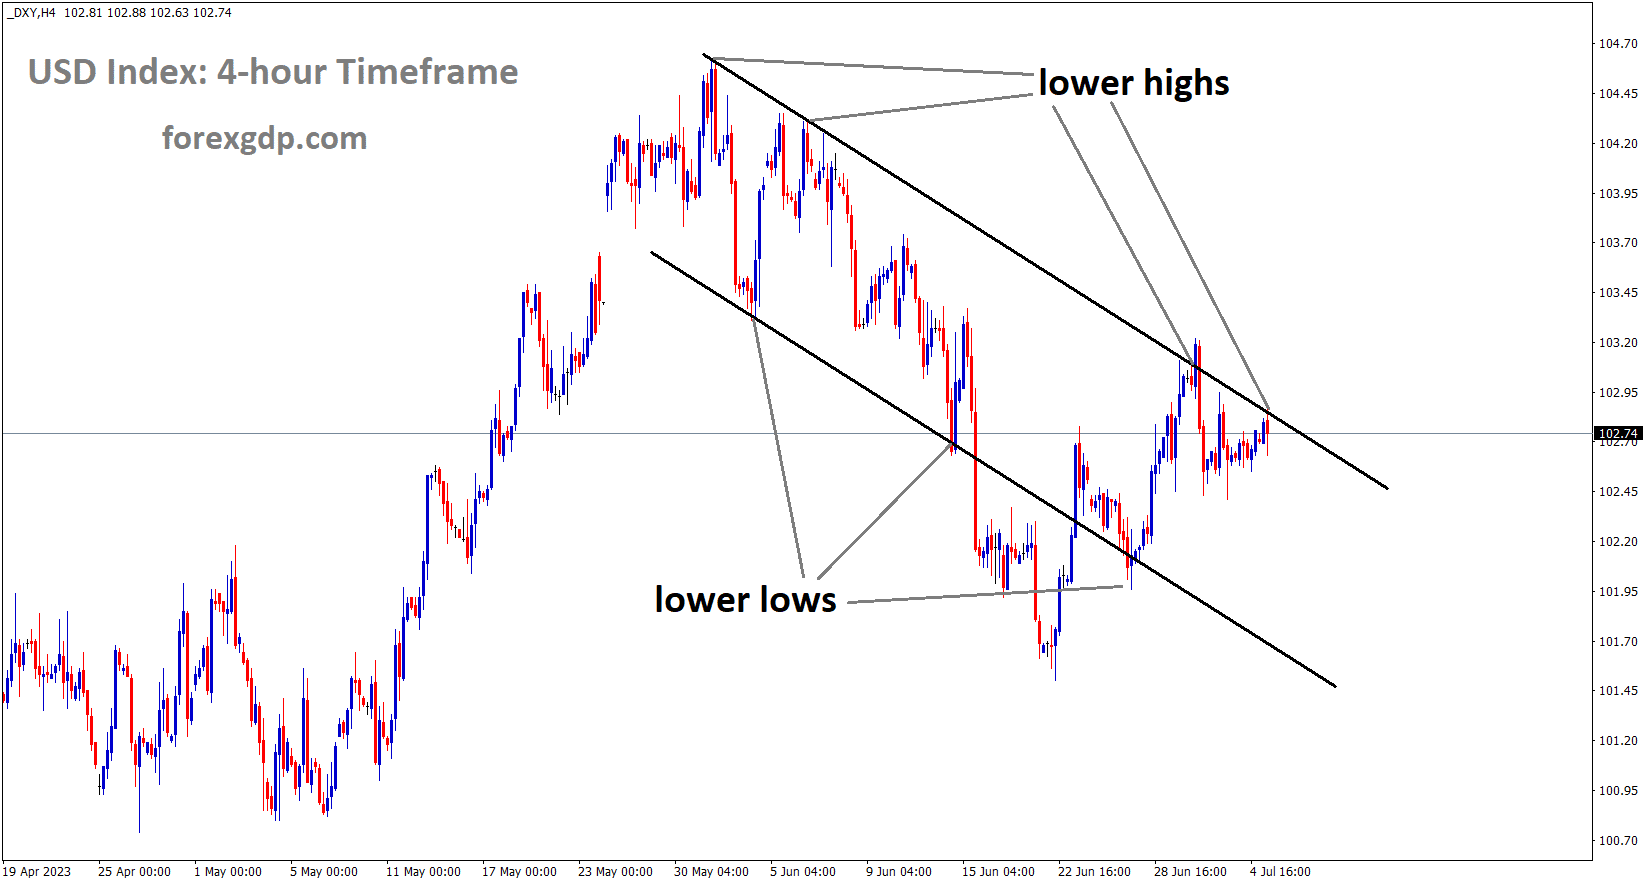 DXY US Dollar index is moving in the Descending channel and the market has reached the lower high area of the channel